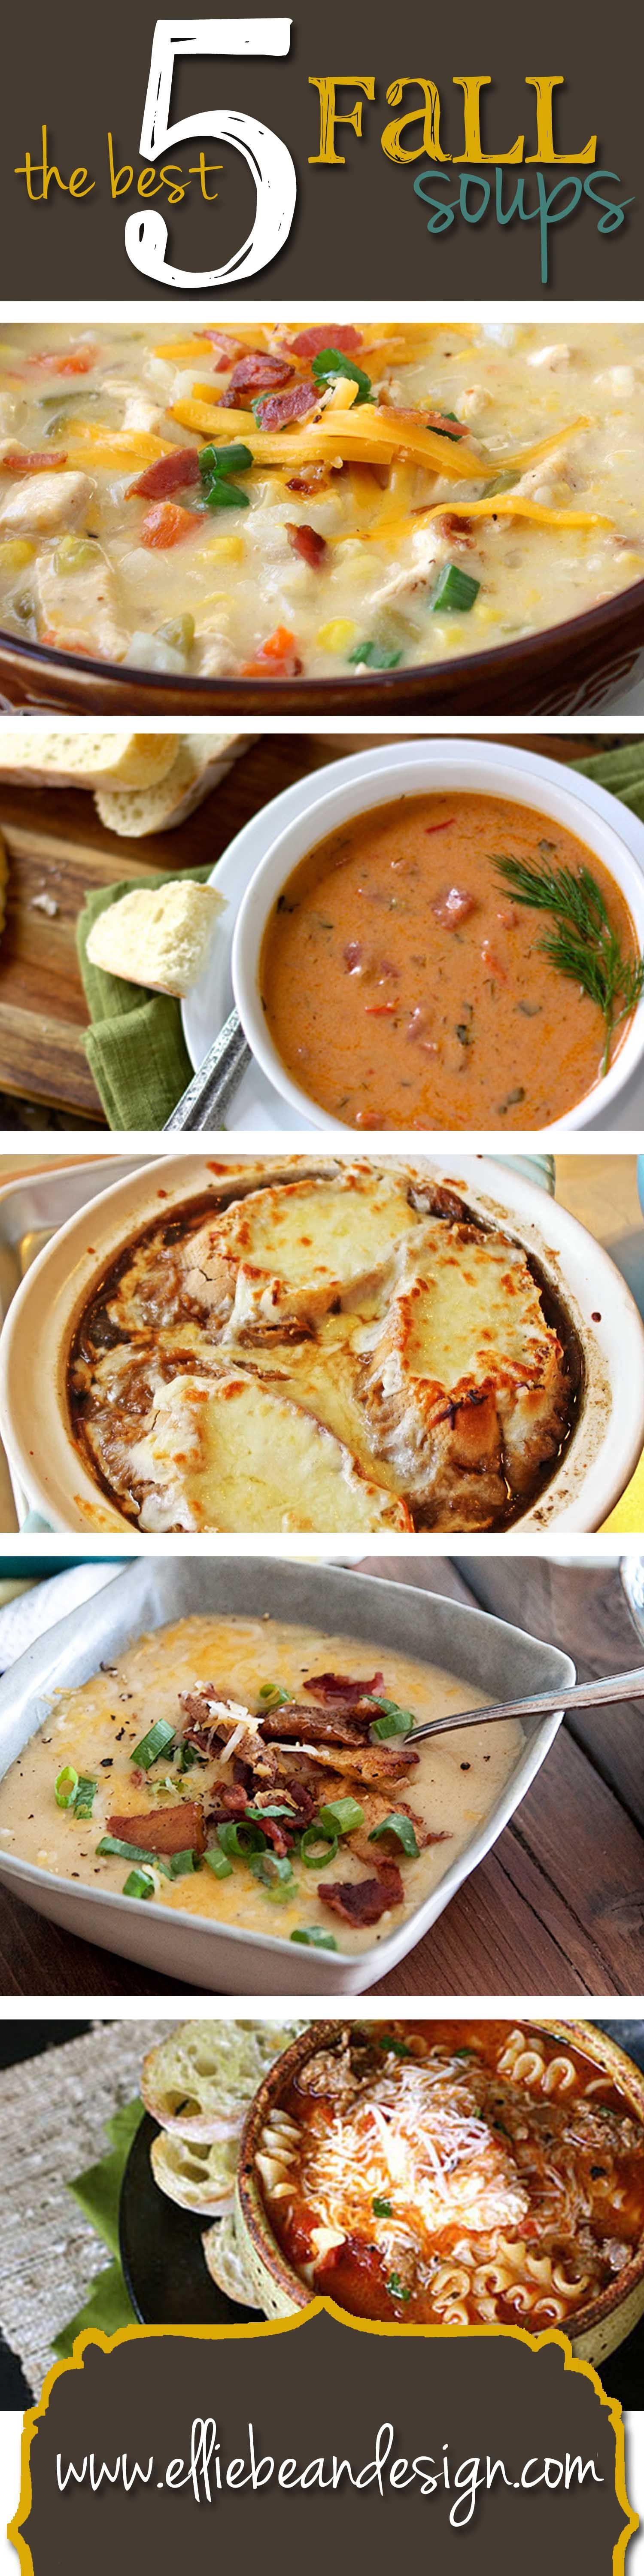 The Best 5 Fall Soup Recipes – Although I will stick with Julia Childs French Onion Soup recipe, these are great for fall, winter,